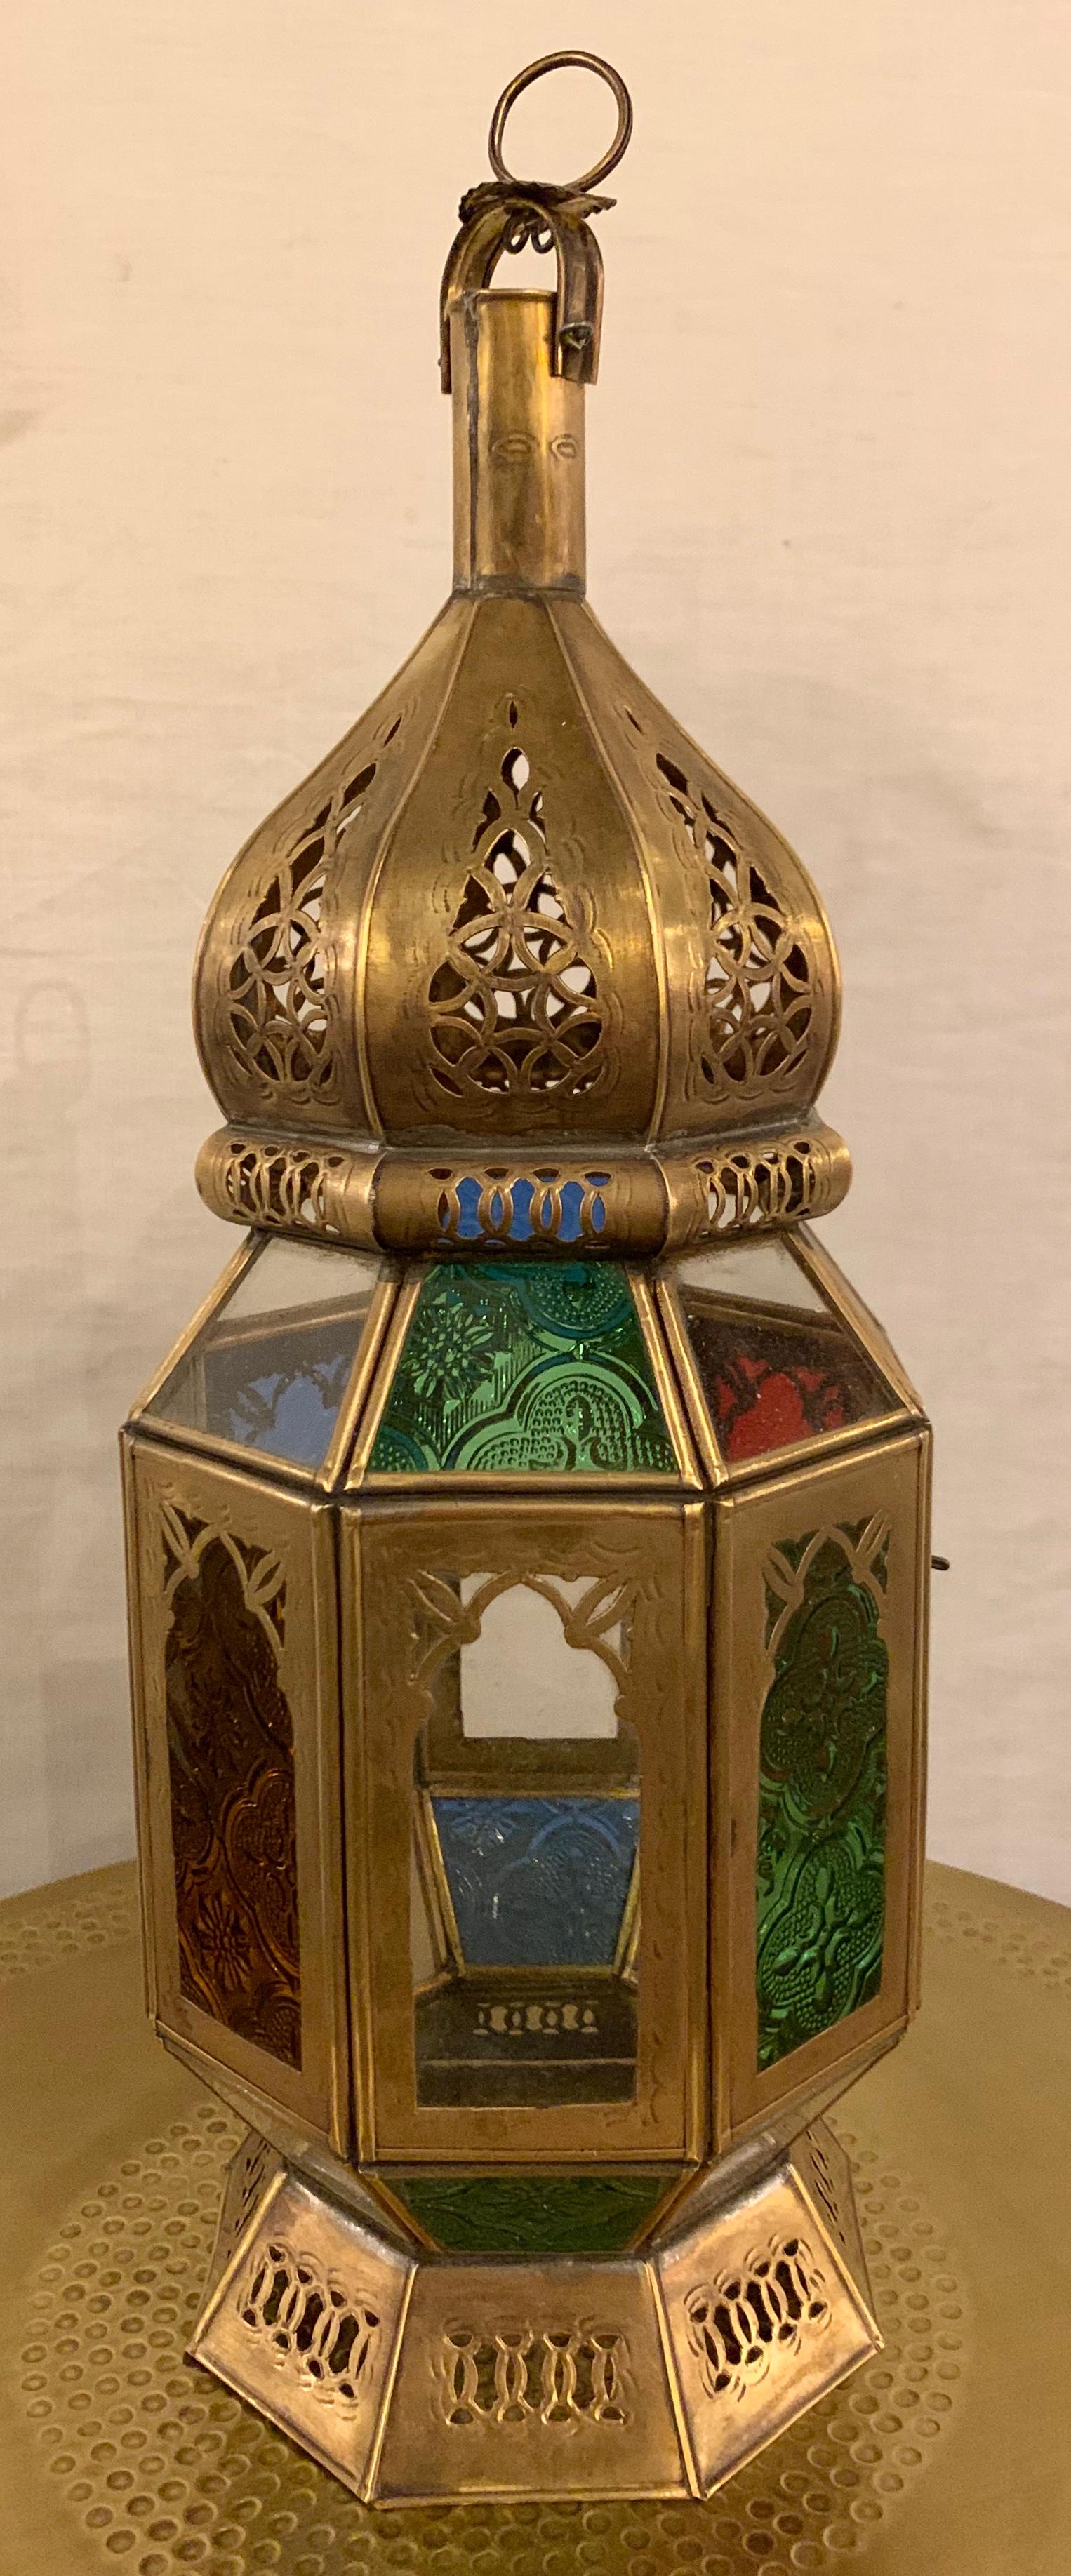 An elegant pair of handmade gold brass table or hanging lanterns, candle or tea light holder. Beautifully carved in a Moorish style and decorated with multi-color glass in red, green and blue, the lanterns will create the boho chic and relaxing vibe